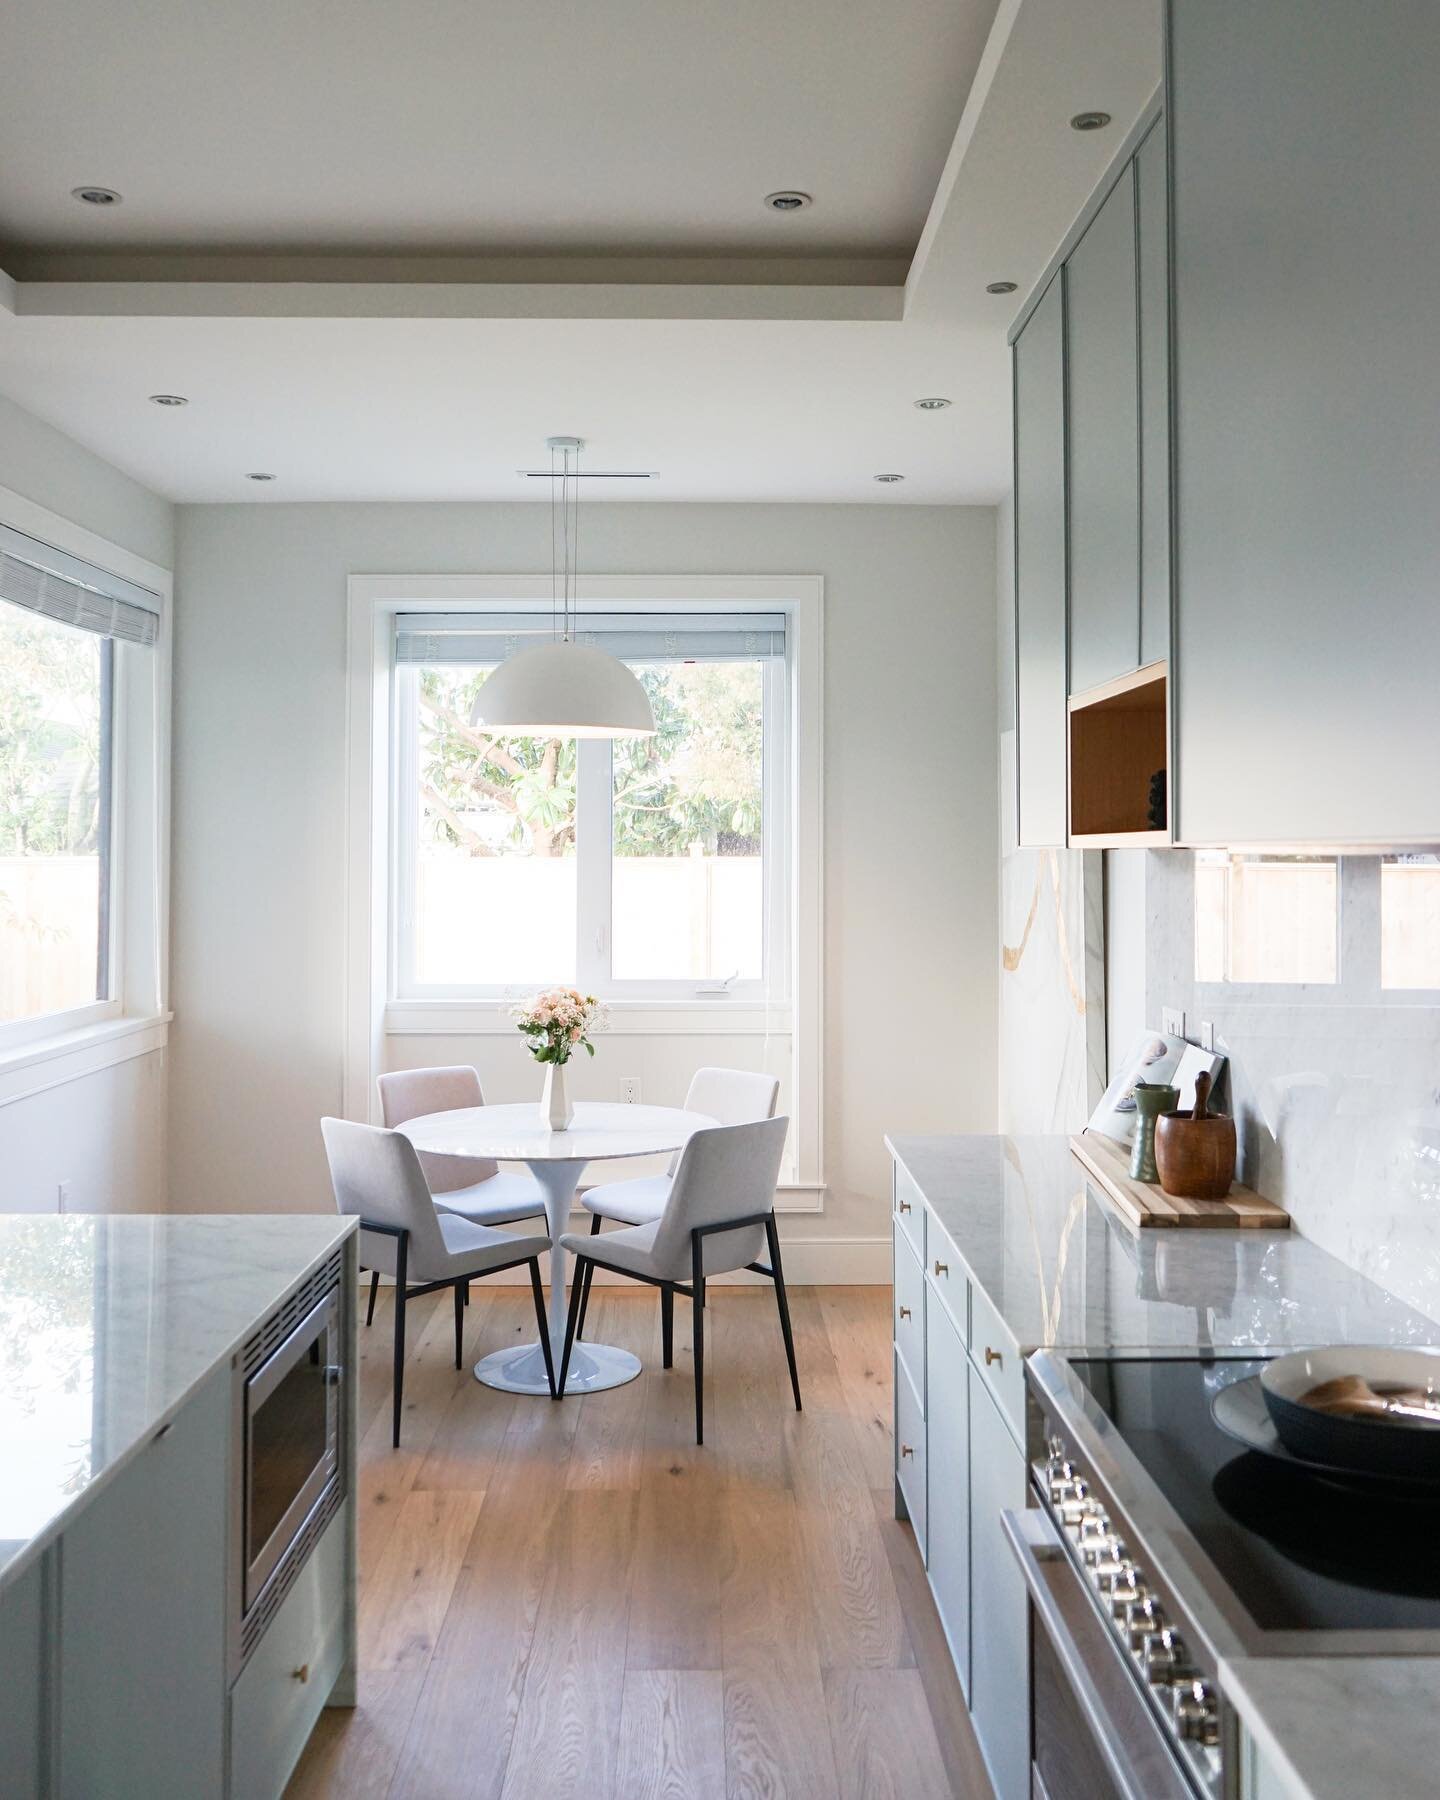 MINT
The mint gray was selected to tie in with the soft tones of the house and to embody a sense of growth and renewal to the Historic Steveston Village 
⌂
⌂
⌂
#designbuild #architect #interiors #bhausliving #houses #interiordesign #luxuryhomes #mode